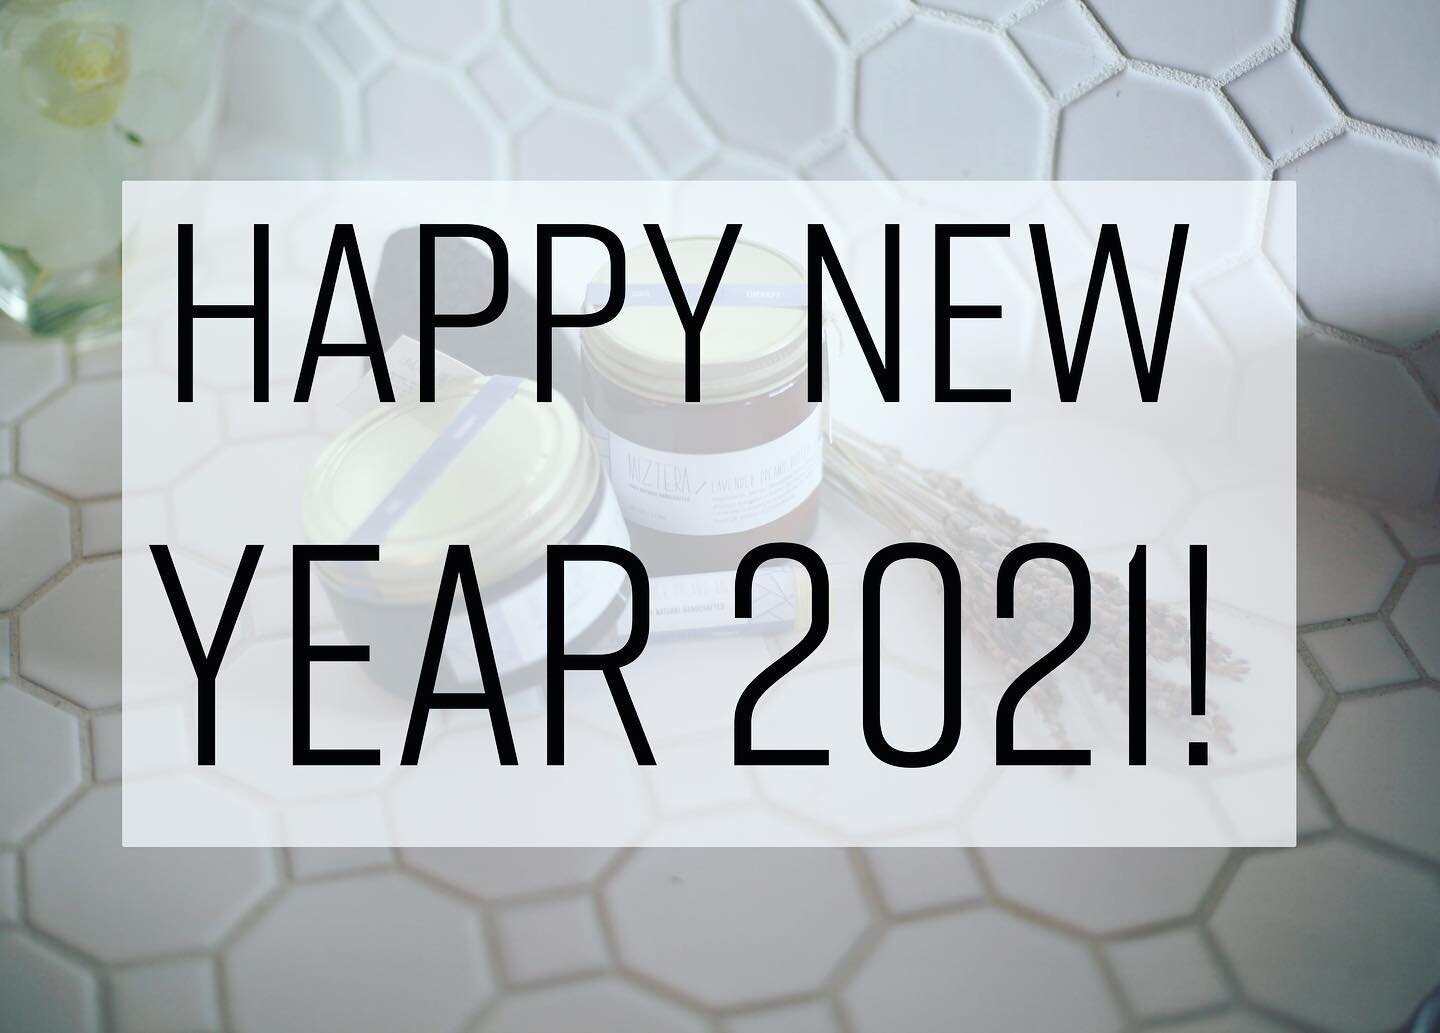 Happy New Year! 🎉 New blog post on the website 👉 link in bio
.
.

#MIZTERA #natural #handcrafted #soultherapy #simplywholesome #smallbatch #nontoxic #plantbased #indiebeauty #greenbeauty #cleanbeauty #greenbeautyproducts #cleanbeautyrevolution #non